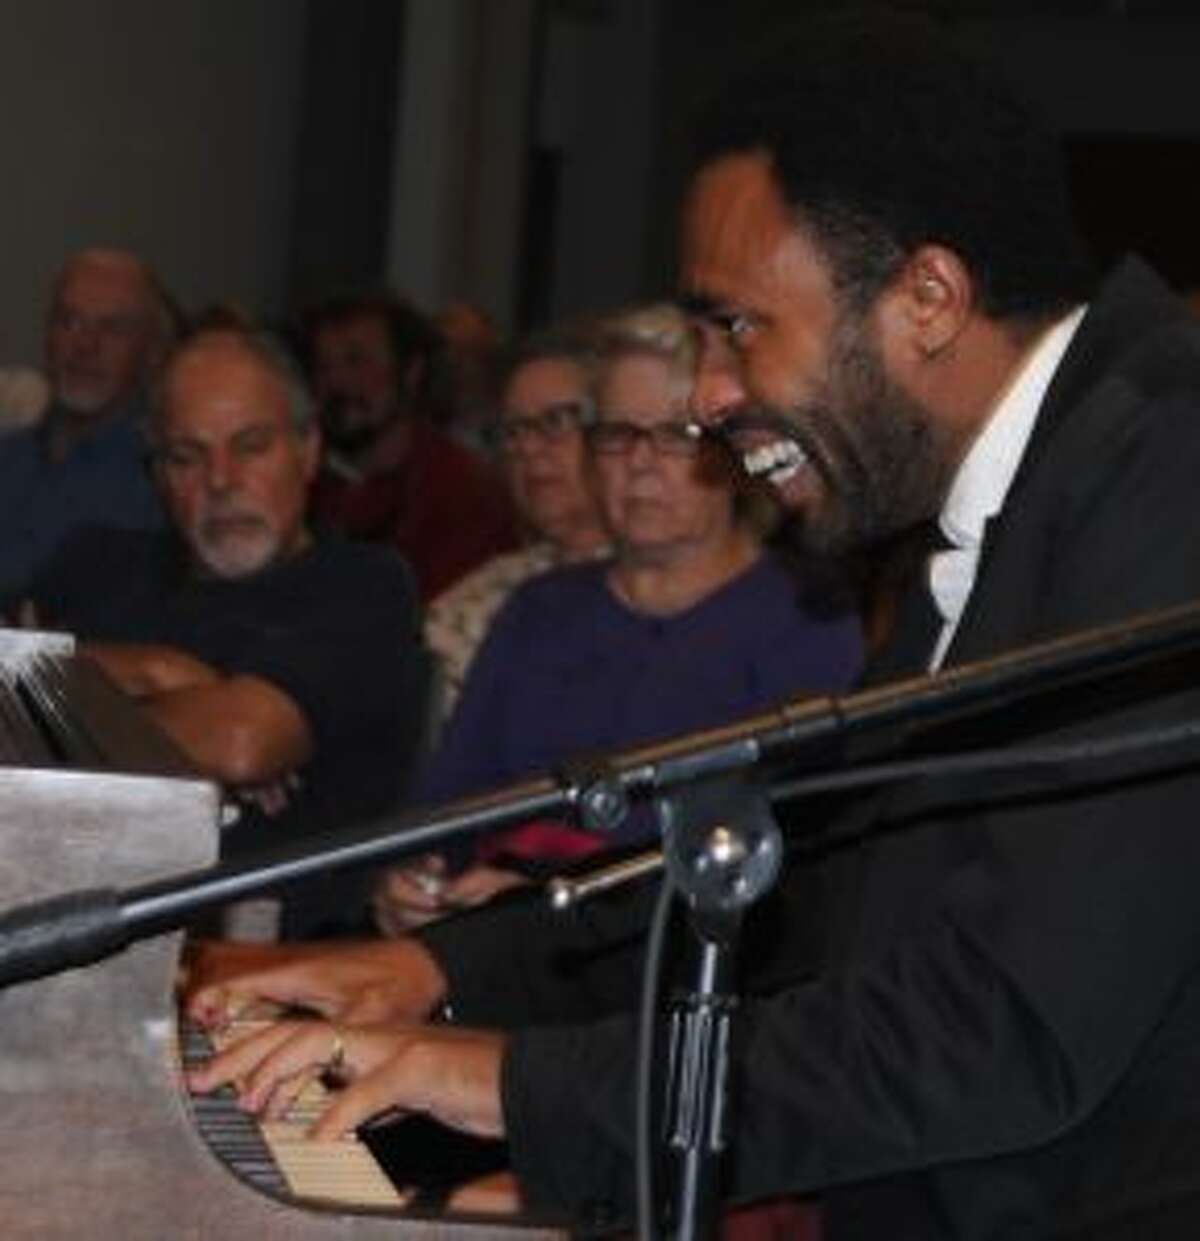 Cuban pianist and composer Dayramir Gonzalez brought his high intensity sound to the library Friday night after giving an afternoon talk on Afro-Cuban music, as part one of Ridgefield’s first Jazz, Funk and Blues Weekend, which included performances at the Ridgefield Playhouse, the Aldrich Museum, Lounsbury House and six downtown restaurants. — Macklin Reid photo